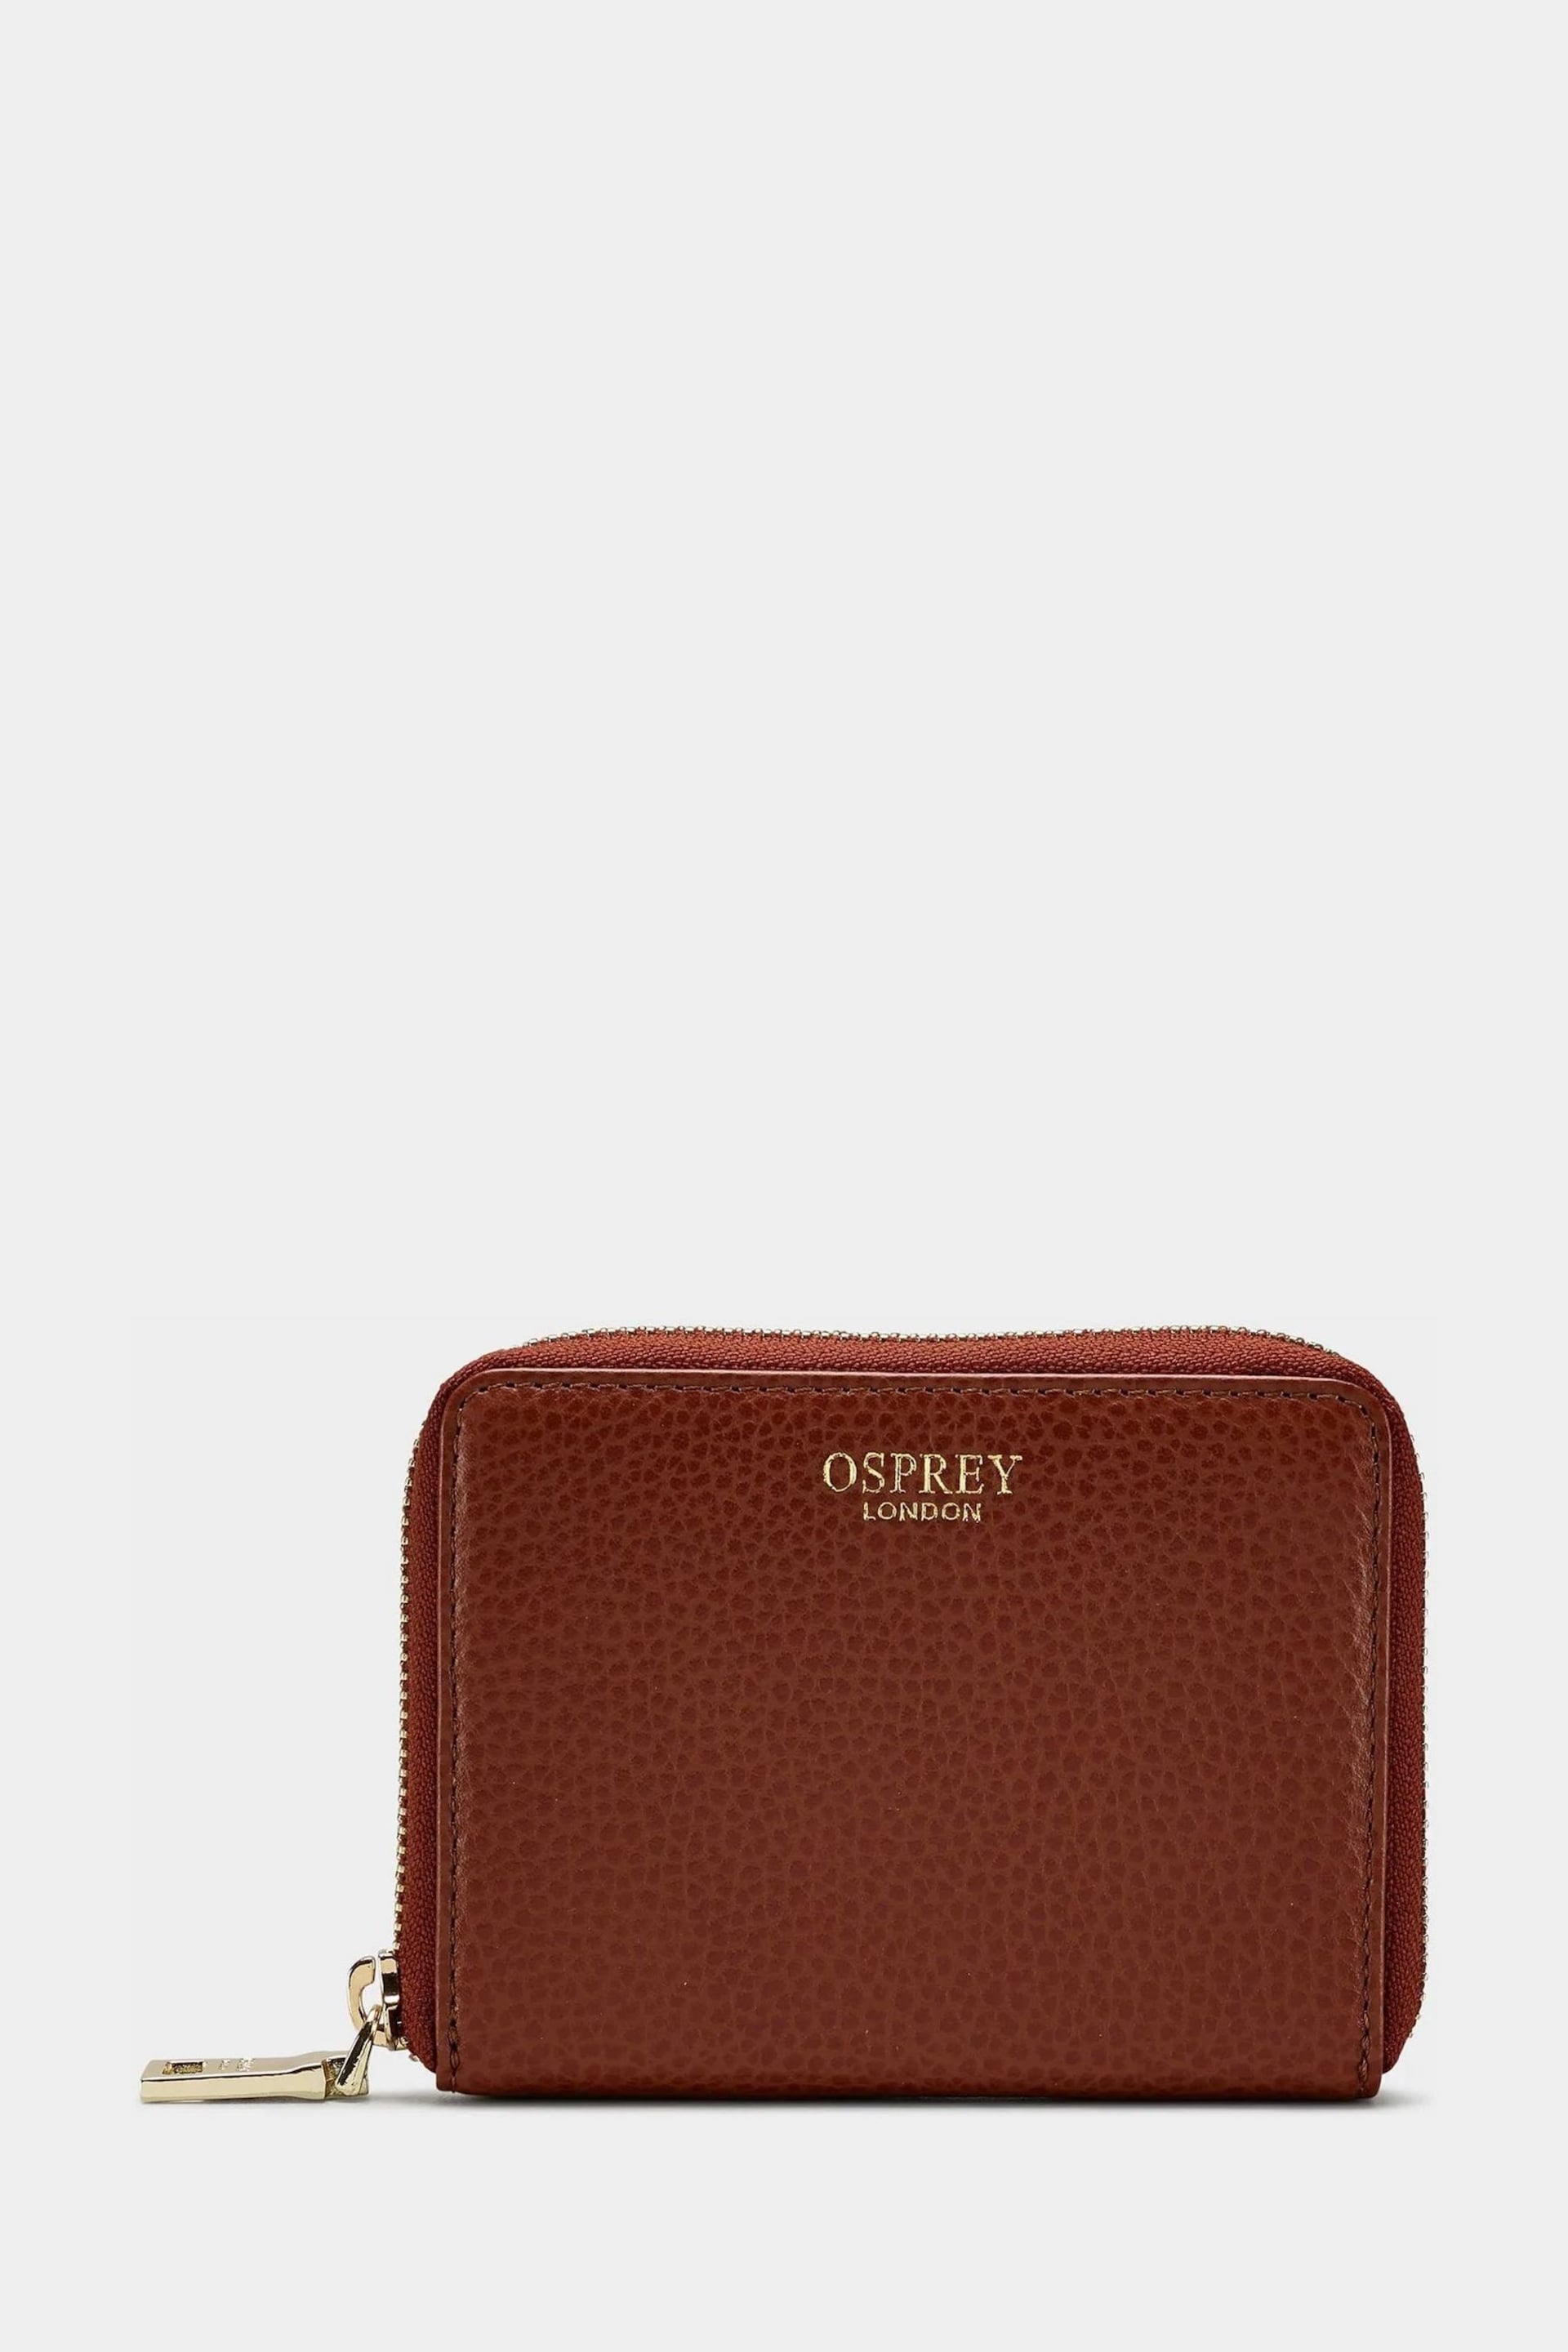 OSPREY LONDON Red The Collier Leather Zip-Round Purse - Image 1 of 3